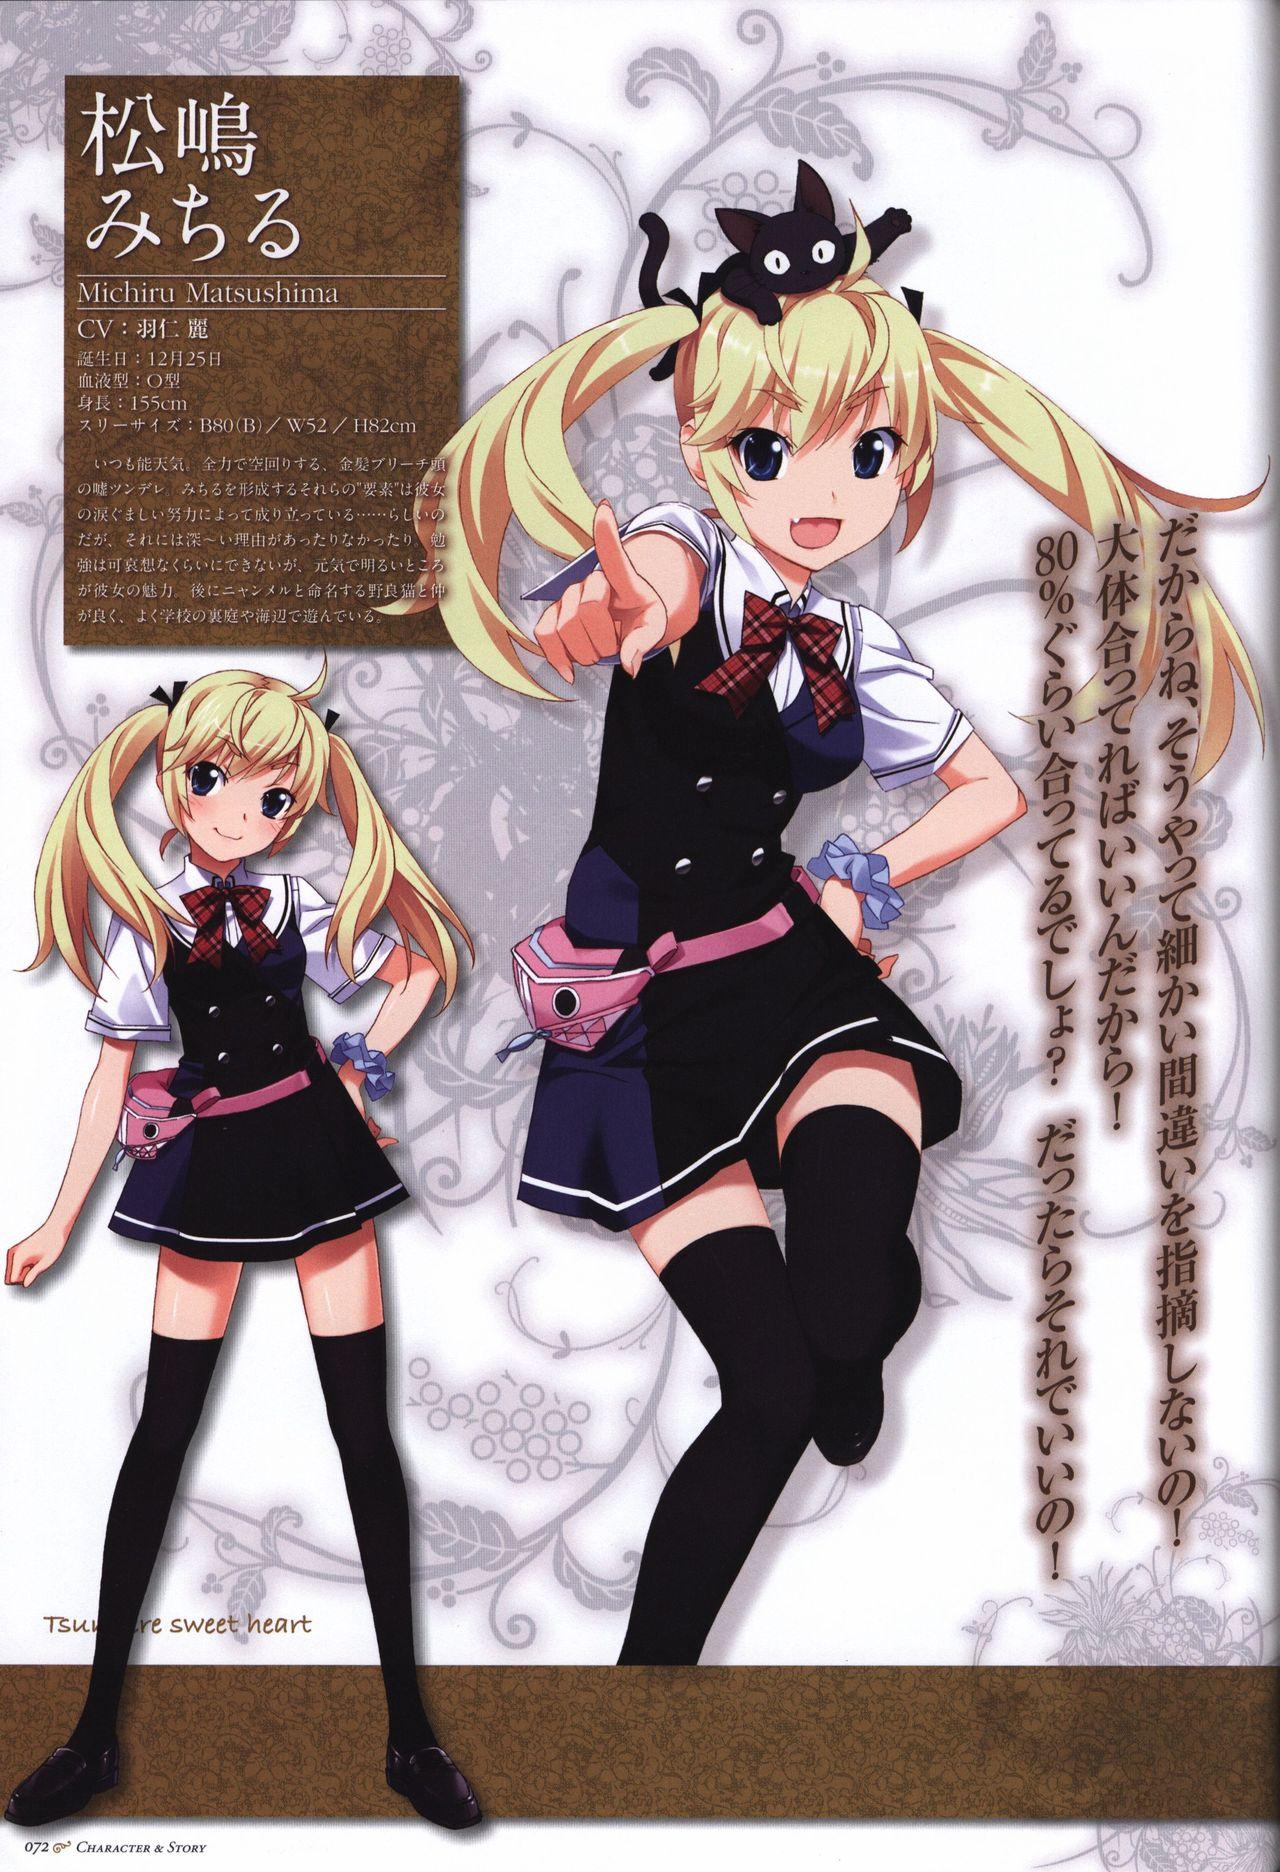 The Fruit of Grisaia Visual FanBook 72